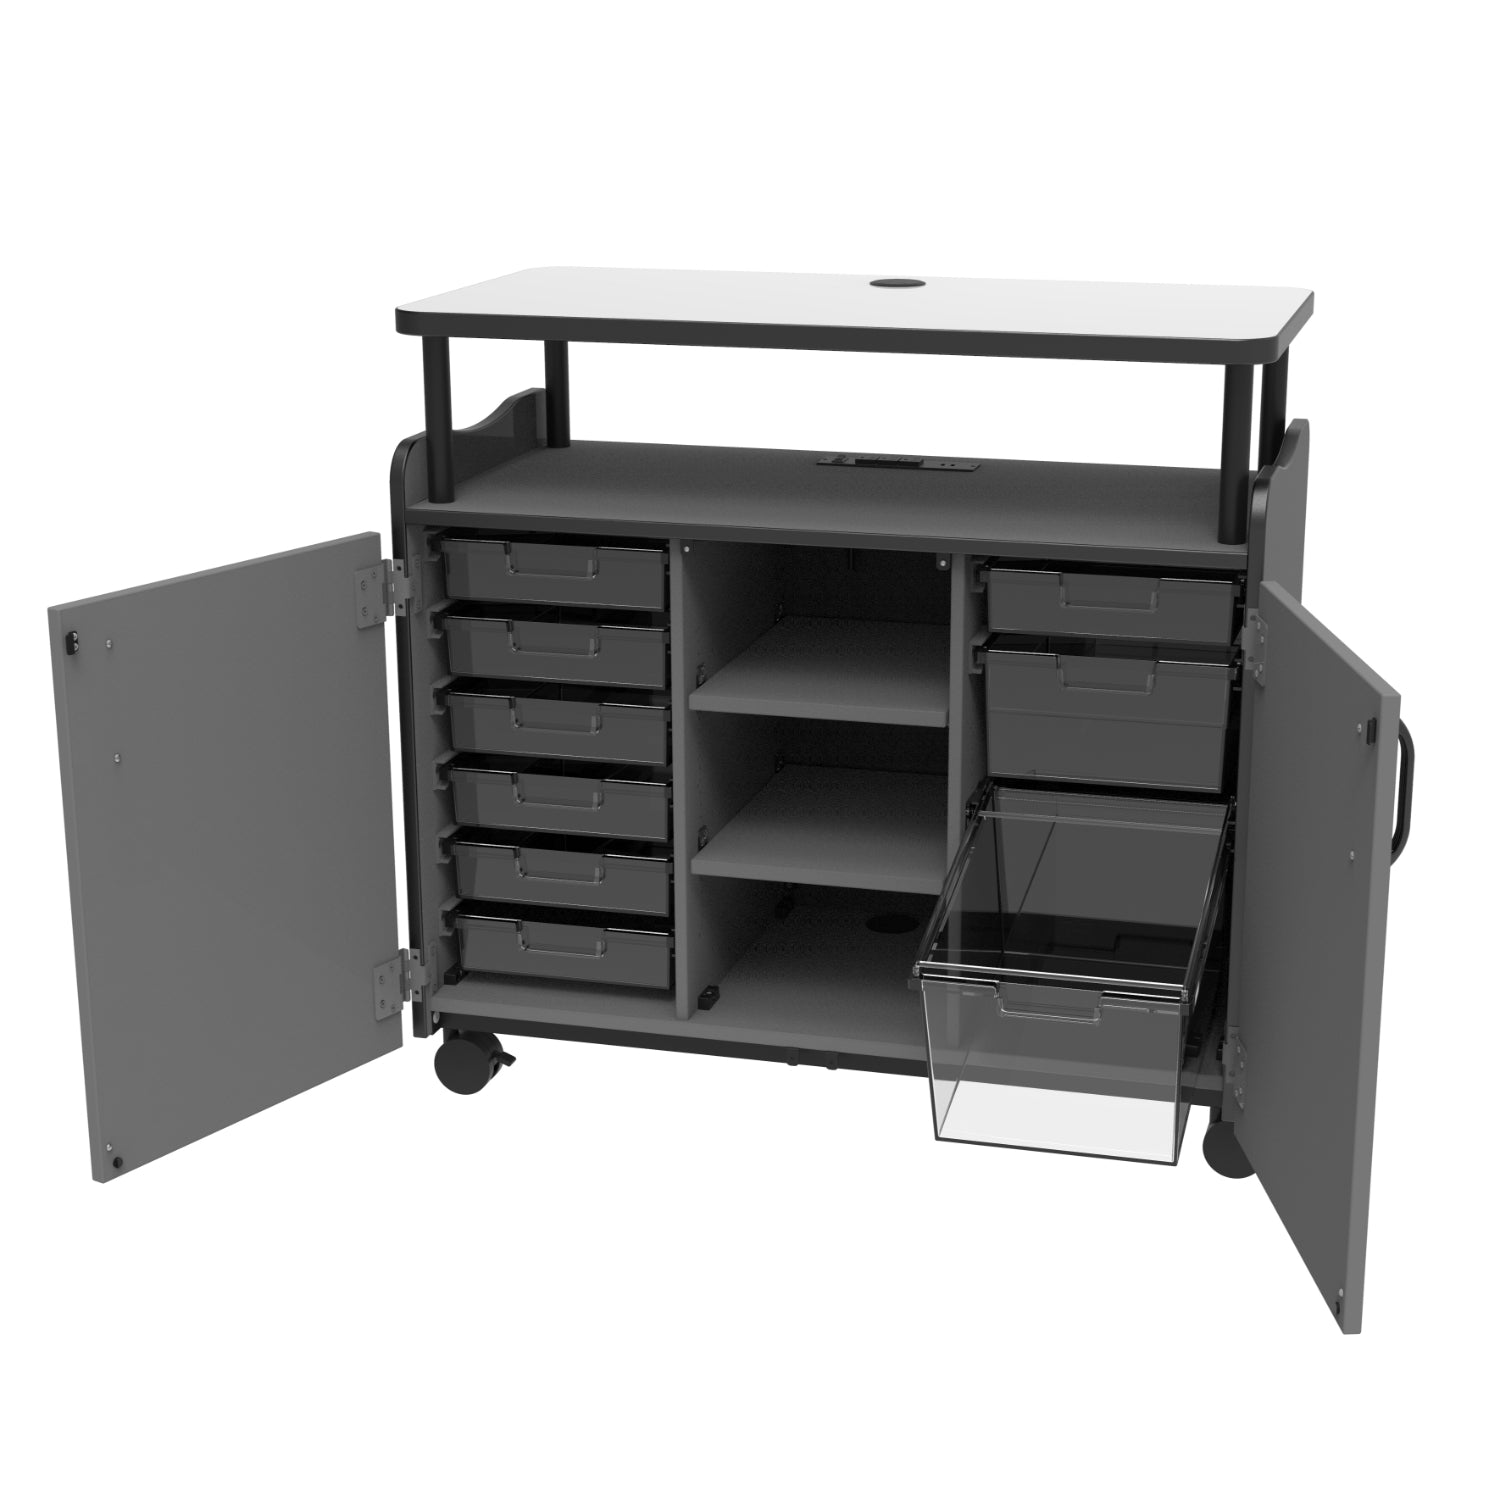 Horizon Makerspace Series Mobile Teachers Workstation with 9 Trays